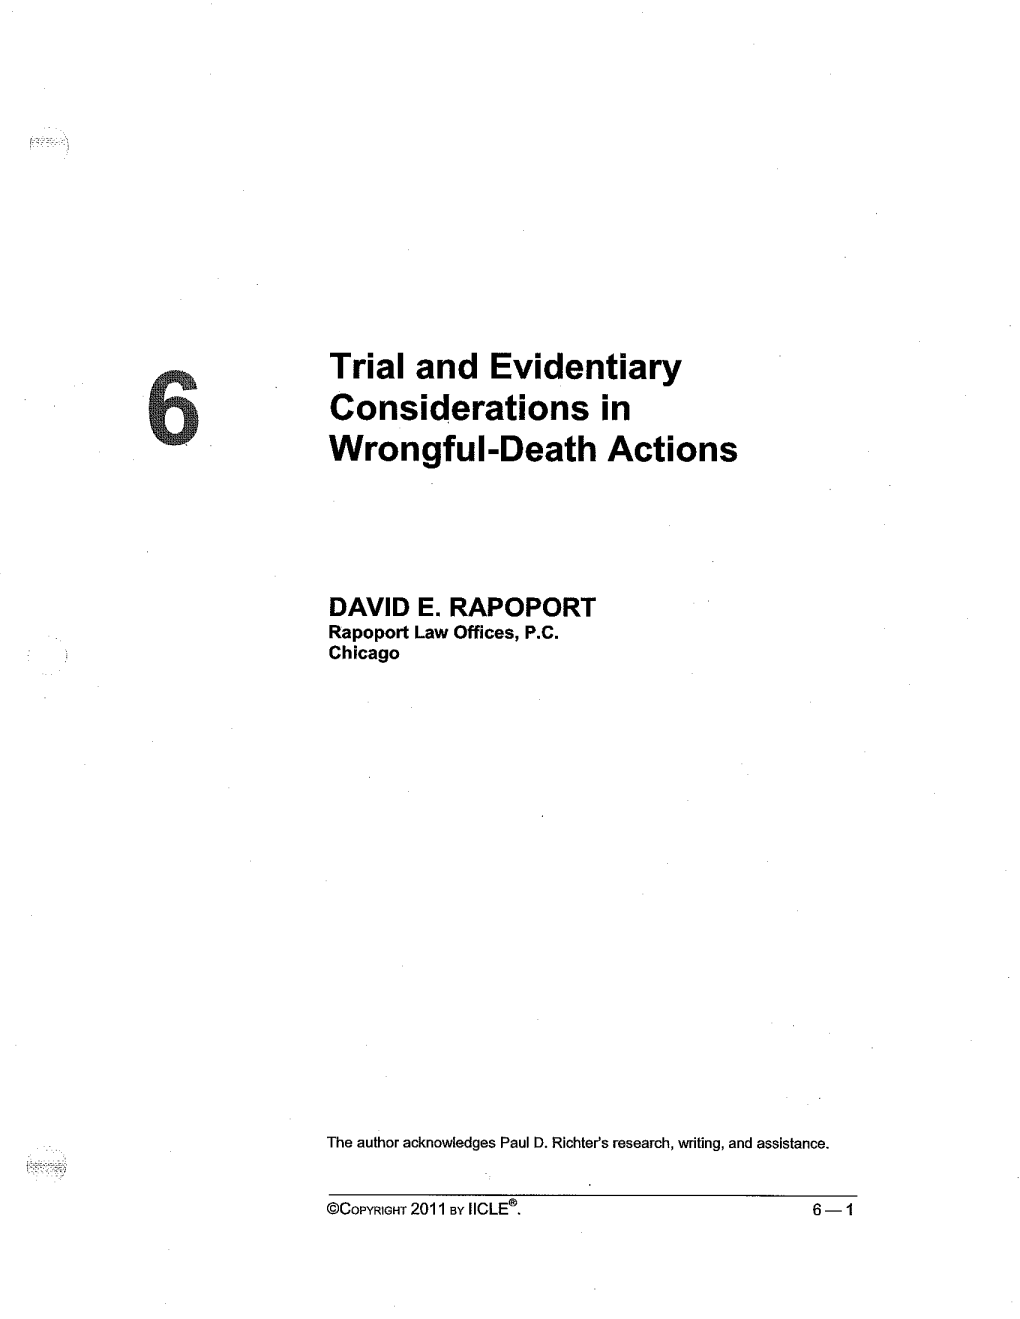 Trial and Evidentiary Considerations in Wrongful-Death Actions